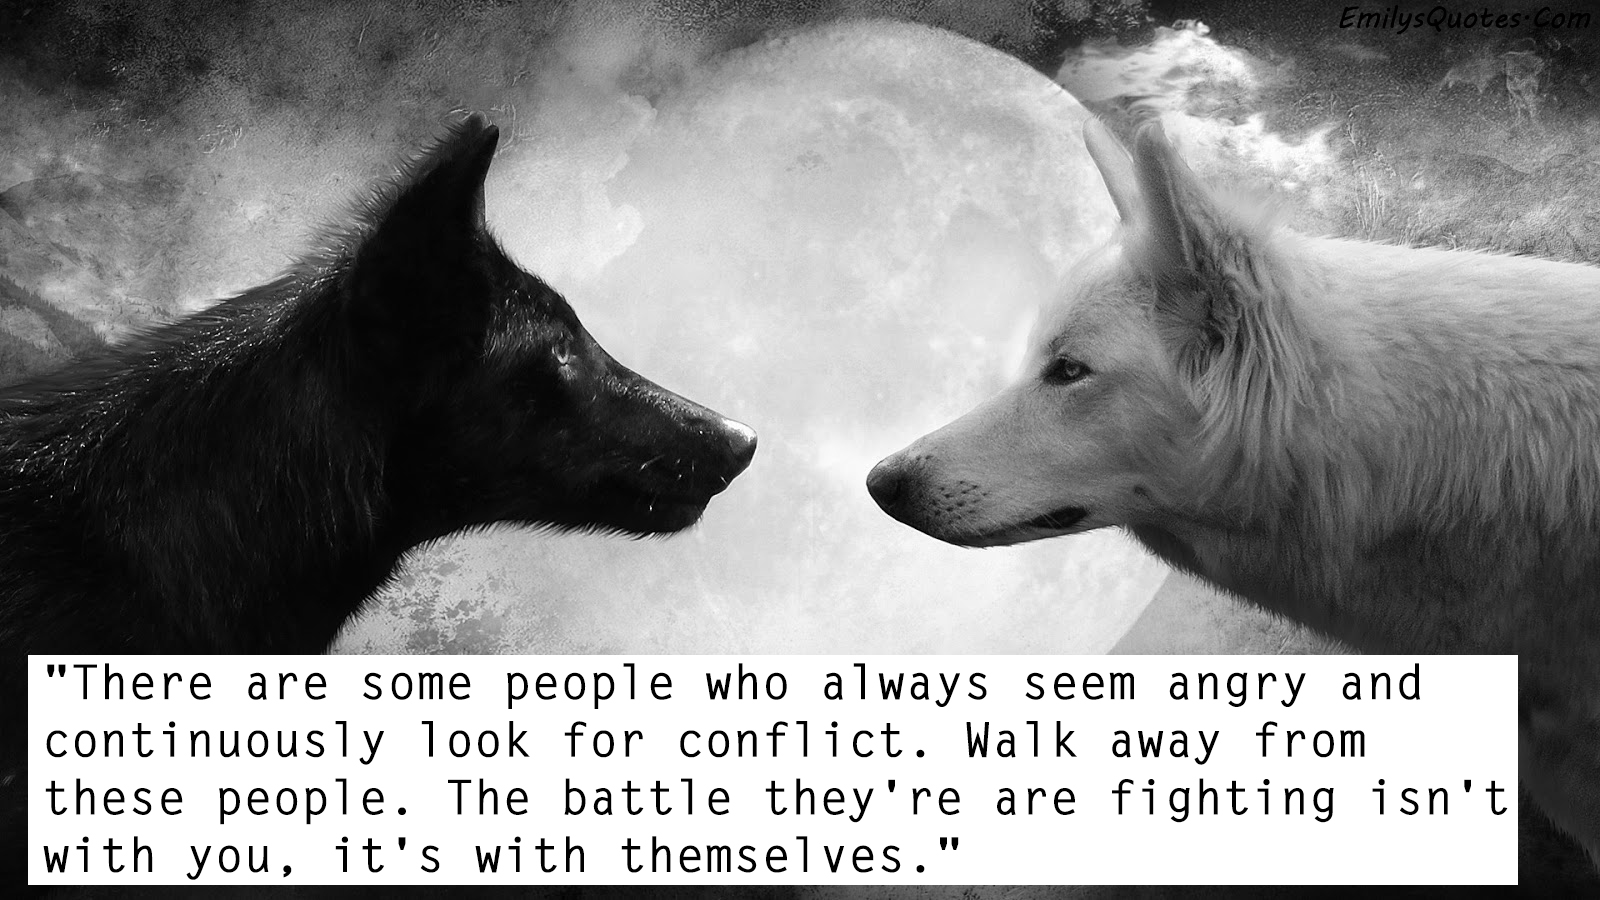 There are some people who always seem angry and continuously look for conflict. Walk away from these people.